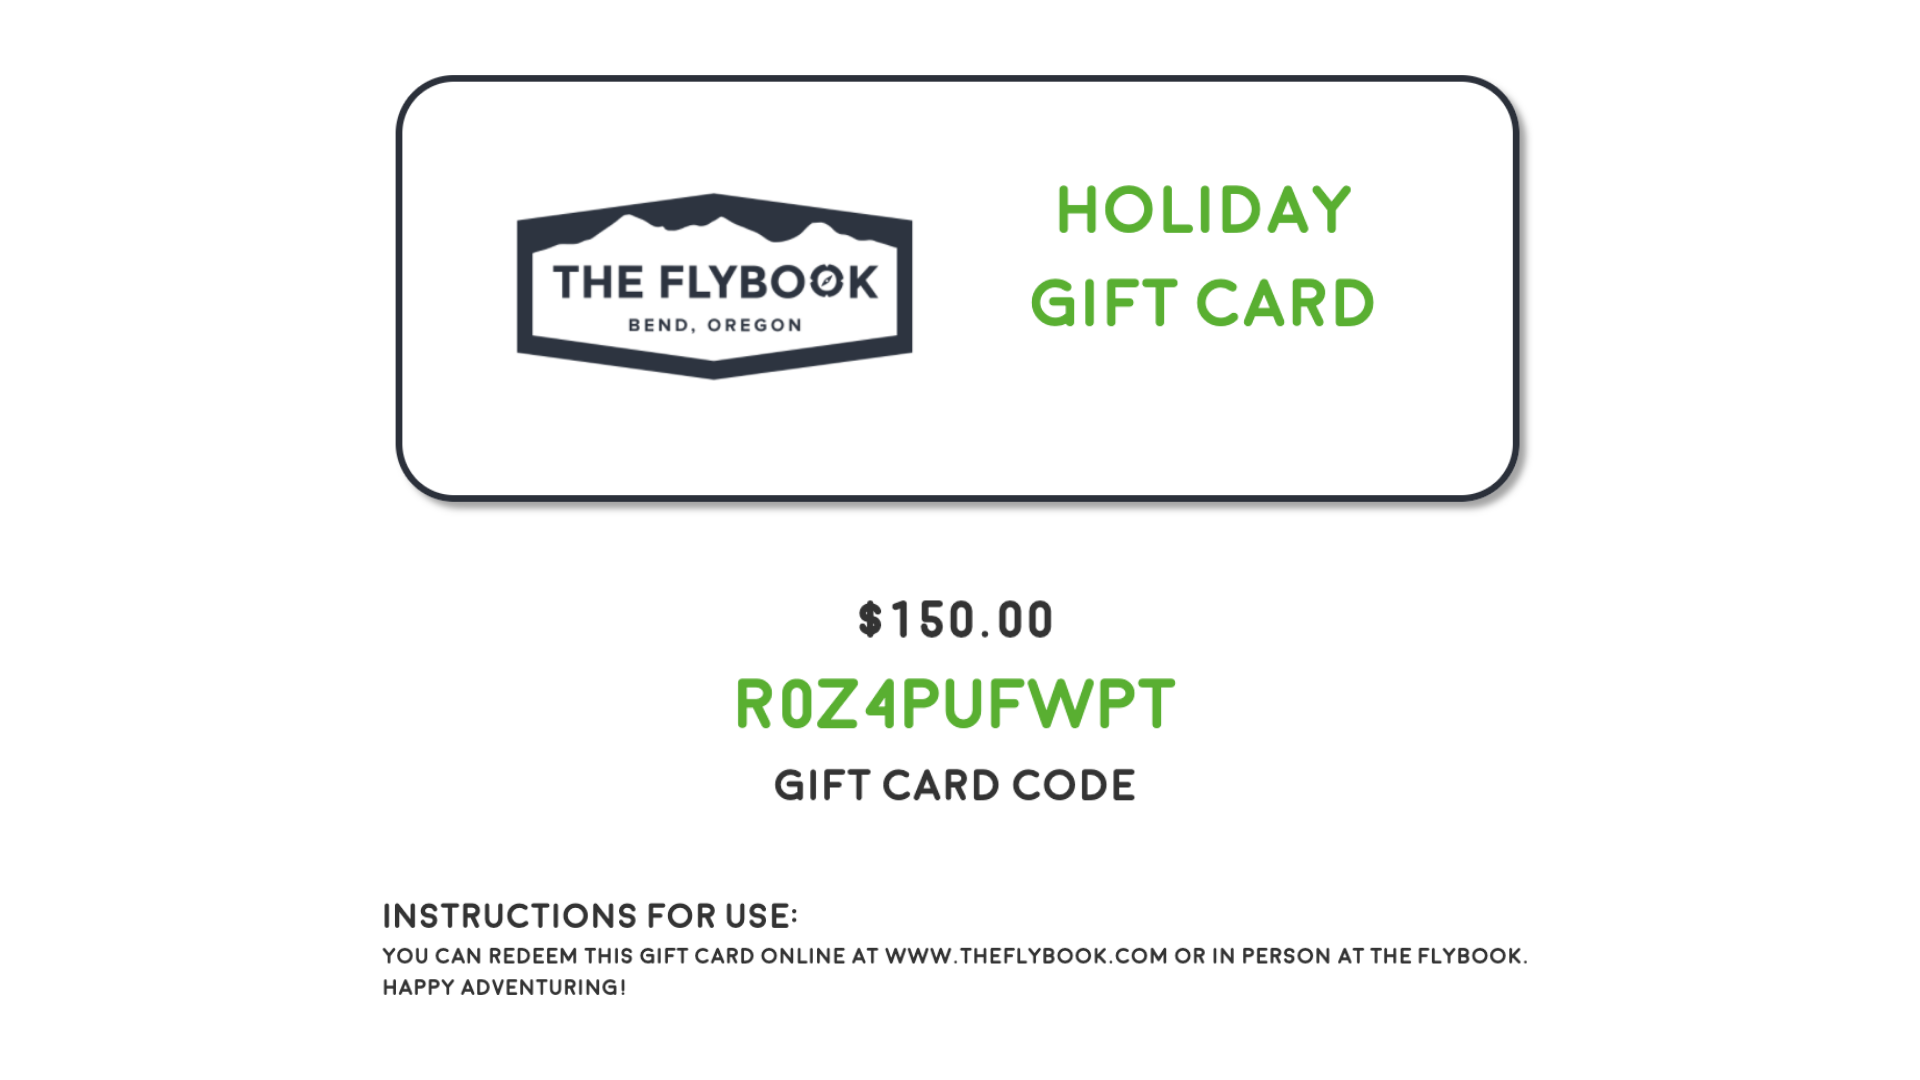 Flybook holiday gift card text